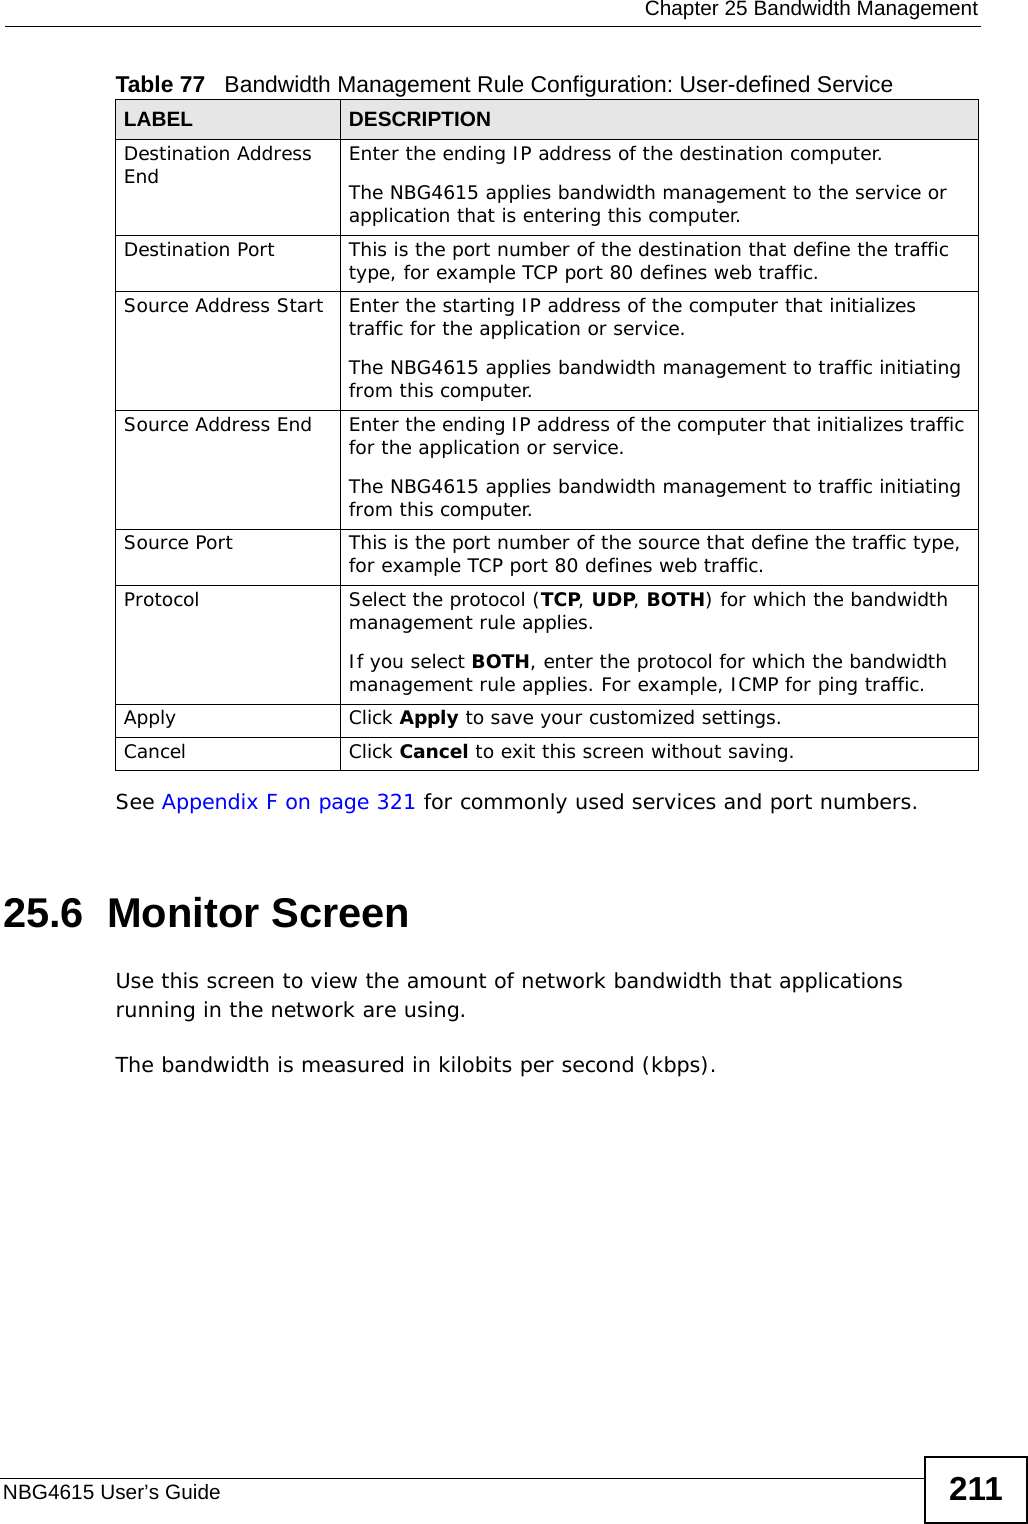  Chapter 25 Bandwidth ManagementNBG4615 User’s Guide 211See Appendix F on page 321 for commonly used services and port numbers.25.6  Monitor ScreenUse this screen to view the amount of network bandwidth that applications running in the network are using.The bandwidth is measured in kilobits per second (kbps). Destination Address End Enter the ending IP address of the destination computer.The NBG4615 applies bandwidth management to the service or application that is entering this computer. Destination Port This is the port number of the destination that define the traffic type, for example TCP port 80 defines web traffic.Source Address Start Enter the starting IP address of the computer that initializes traffic for the application or service. The NBG4615 applies bandwidth management to traffic initiating from this computer. Source Address End Enter the ending IP address of the computer that initializes traffic for the application or service. The NBG4615 applies bandwidth management to traffic initiating from this computer. Source Port This is the port number of the source that define the traffic type, for example TCP port 80 defines web traffic.Protocol Select the protocol (TCP, UDP, BOTH) for which the bandwidth management rule applies. If you select BOTH, enter the protocol for which the bandwidth management rule applies. For example, ICMP for ping traffic.Apply Click Apply to save your customized settings.Cancel Click Cancel to exit this screen without saving.Table 77   Bandwidth Management Rule Configuration: User-defined Service LABEL DESCRIPTION